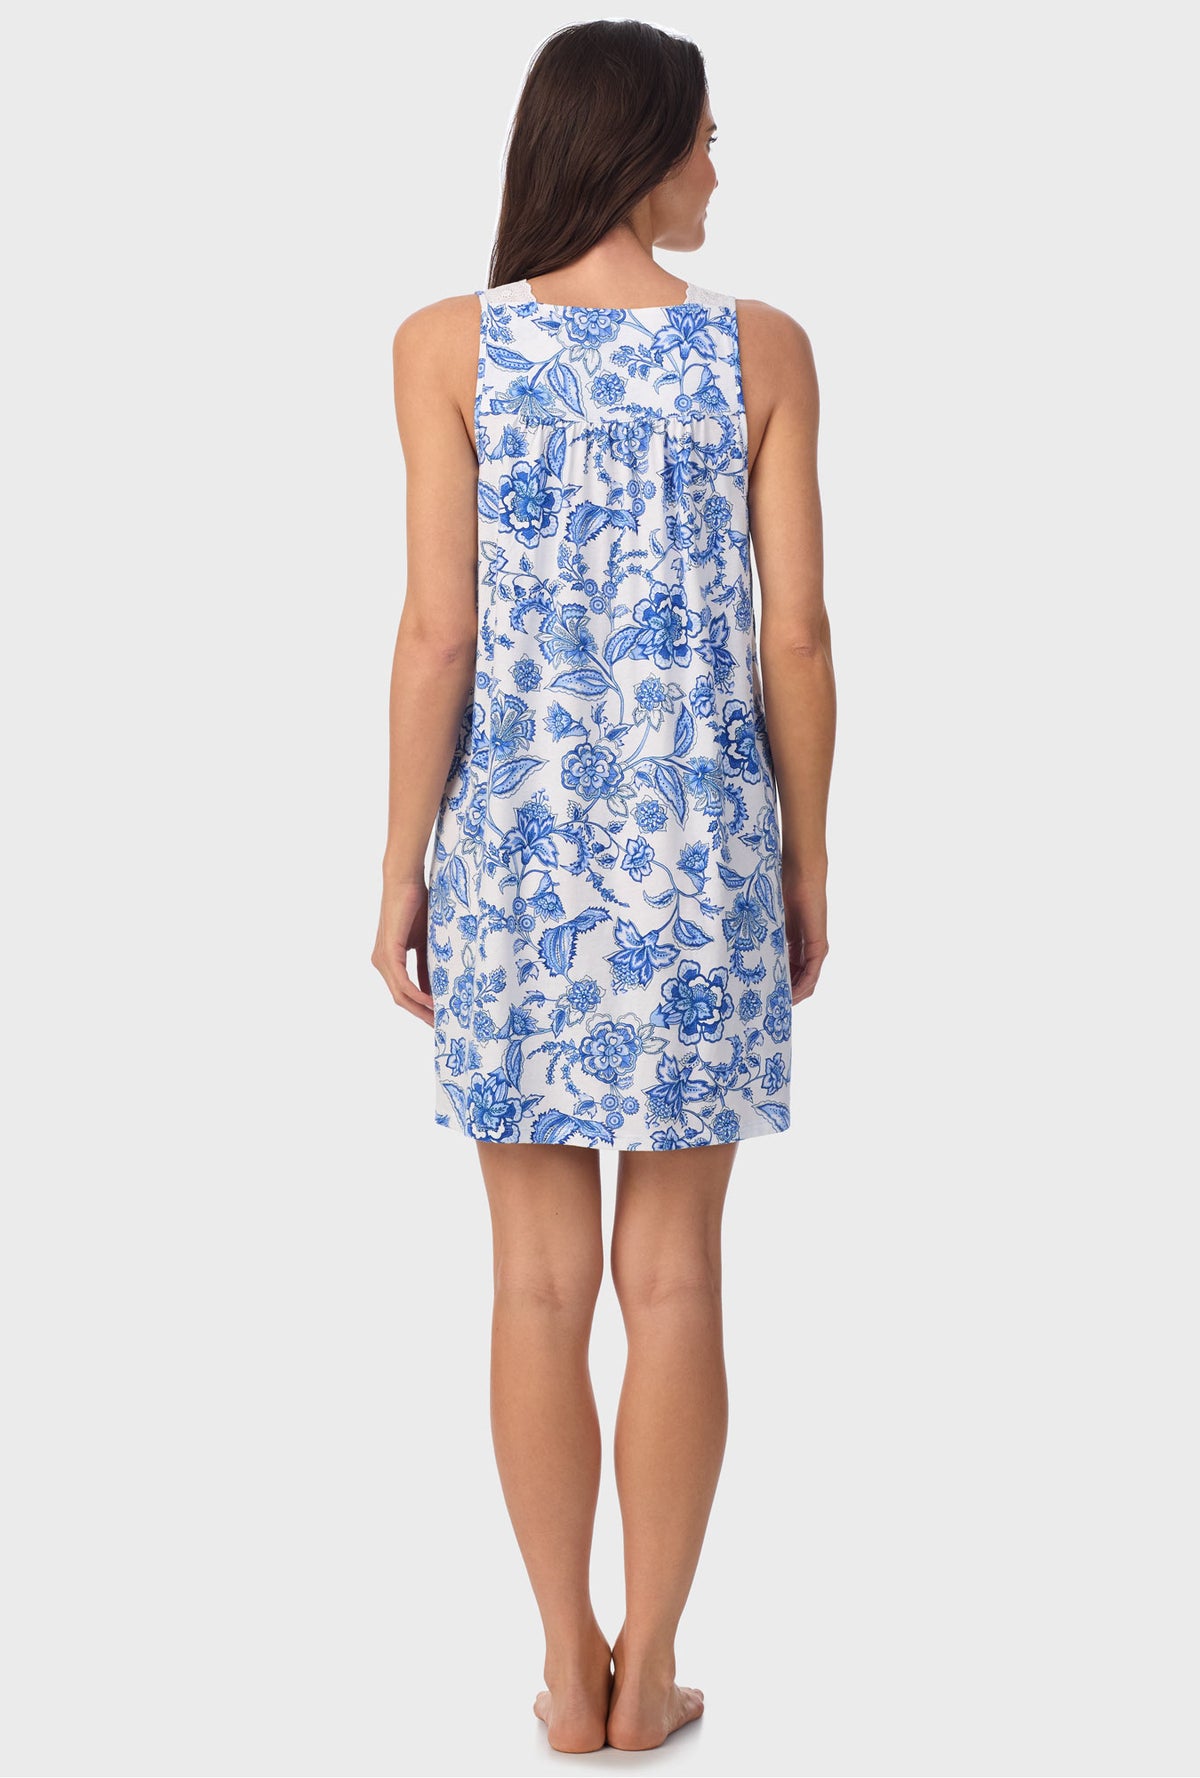 A lady wearing blue sleeveless   Floral Vine Sleeveless Chemise with Colbalt Blue print